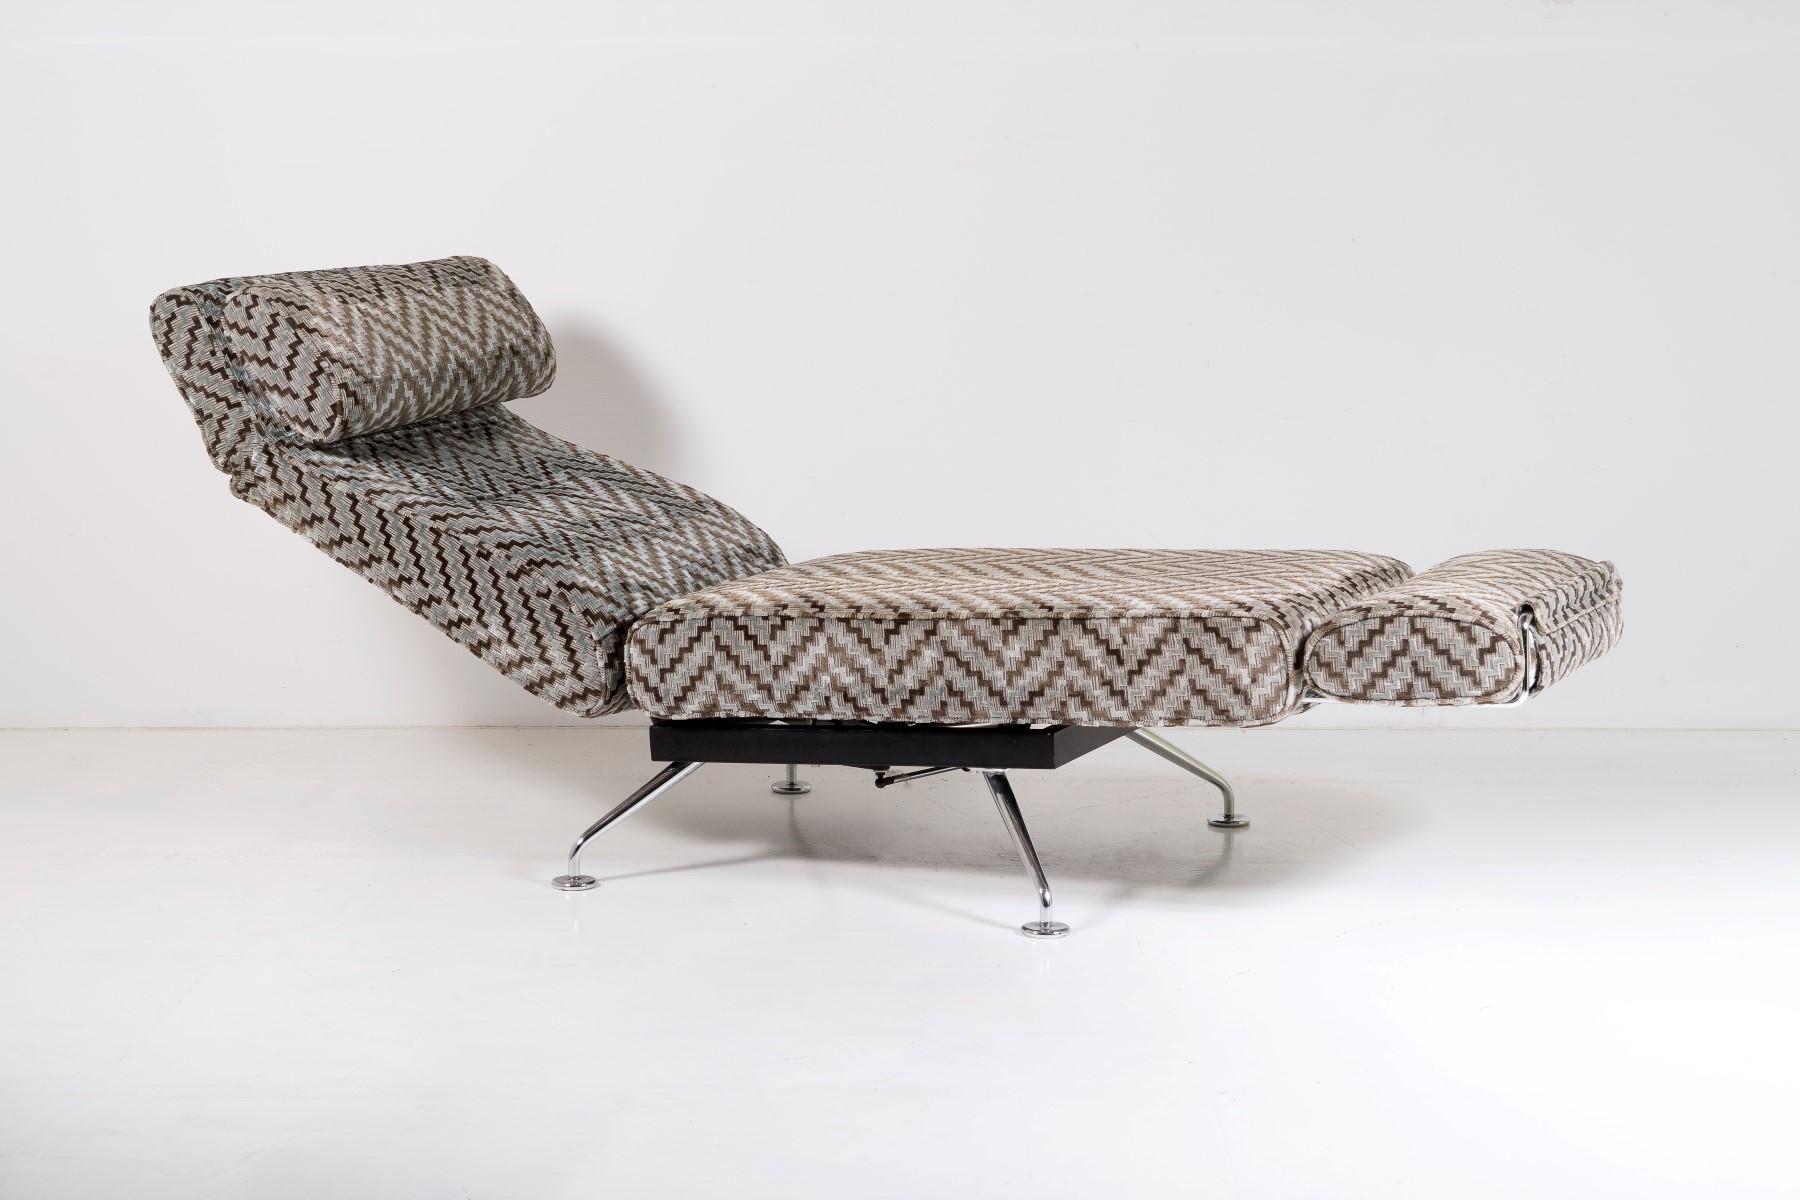 A lovely high quality 1980s Chaise Longue day bed recliner chair is a stone chevron fabric.  Believed to have been purchased from Harrods London in the early 1980s, the recliner adjusts to several positions, can be used as a chair or a full chaise